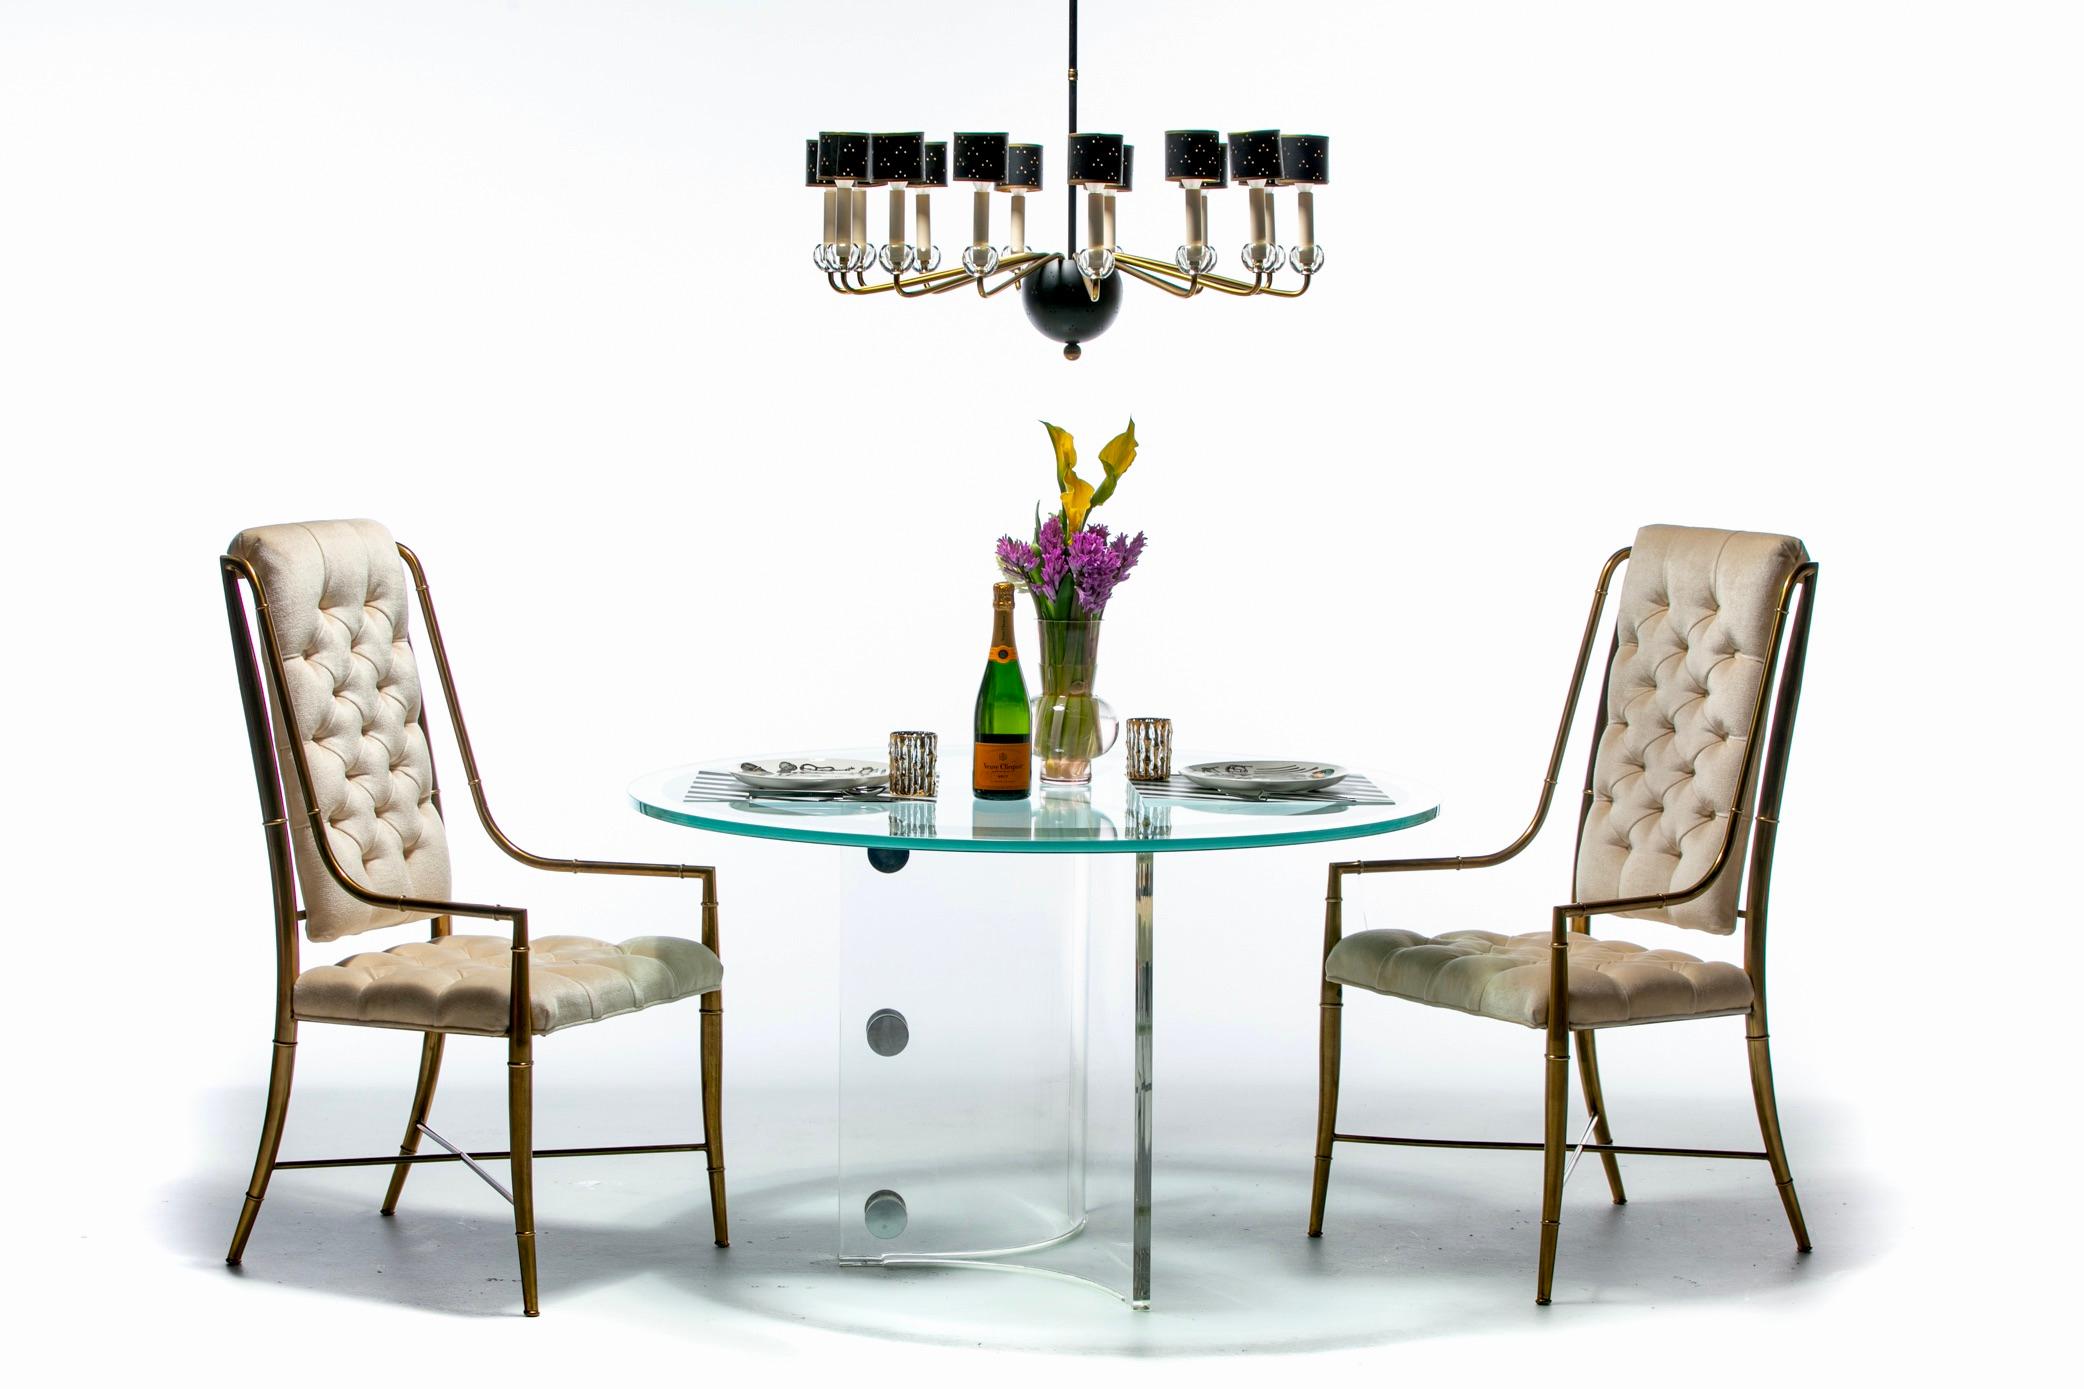 Stunning and glamorous to the max 1950s Mid-Century Modern Atomic Chandelier in the style of Samuel Marx restored from top to bottom by the nationally renowned restoration experts at Saint Louis Antique Lighting. UL Certified wiring. This gorgeous